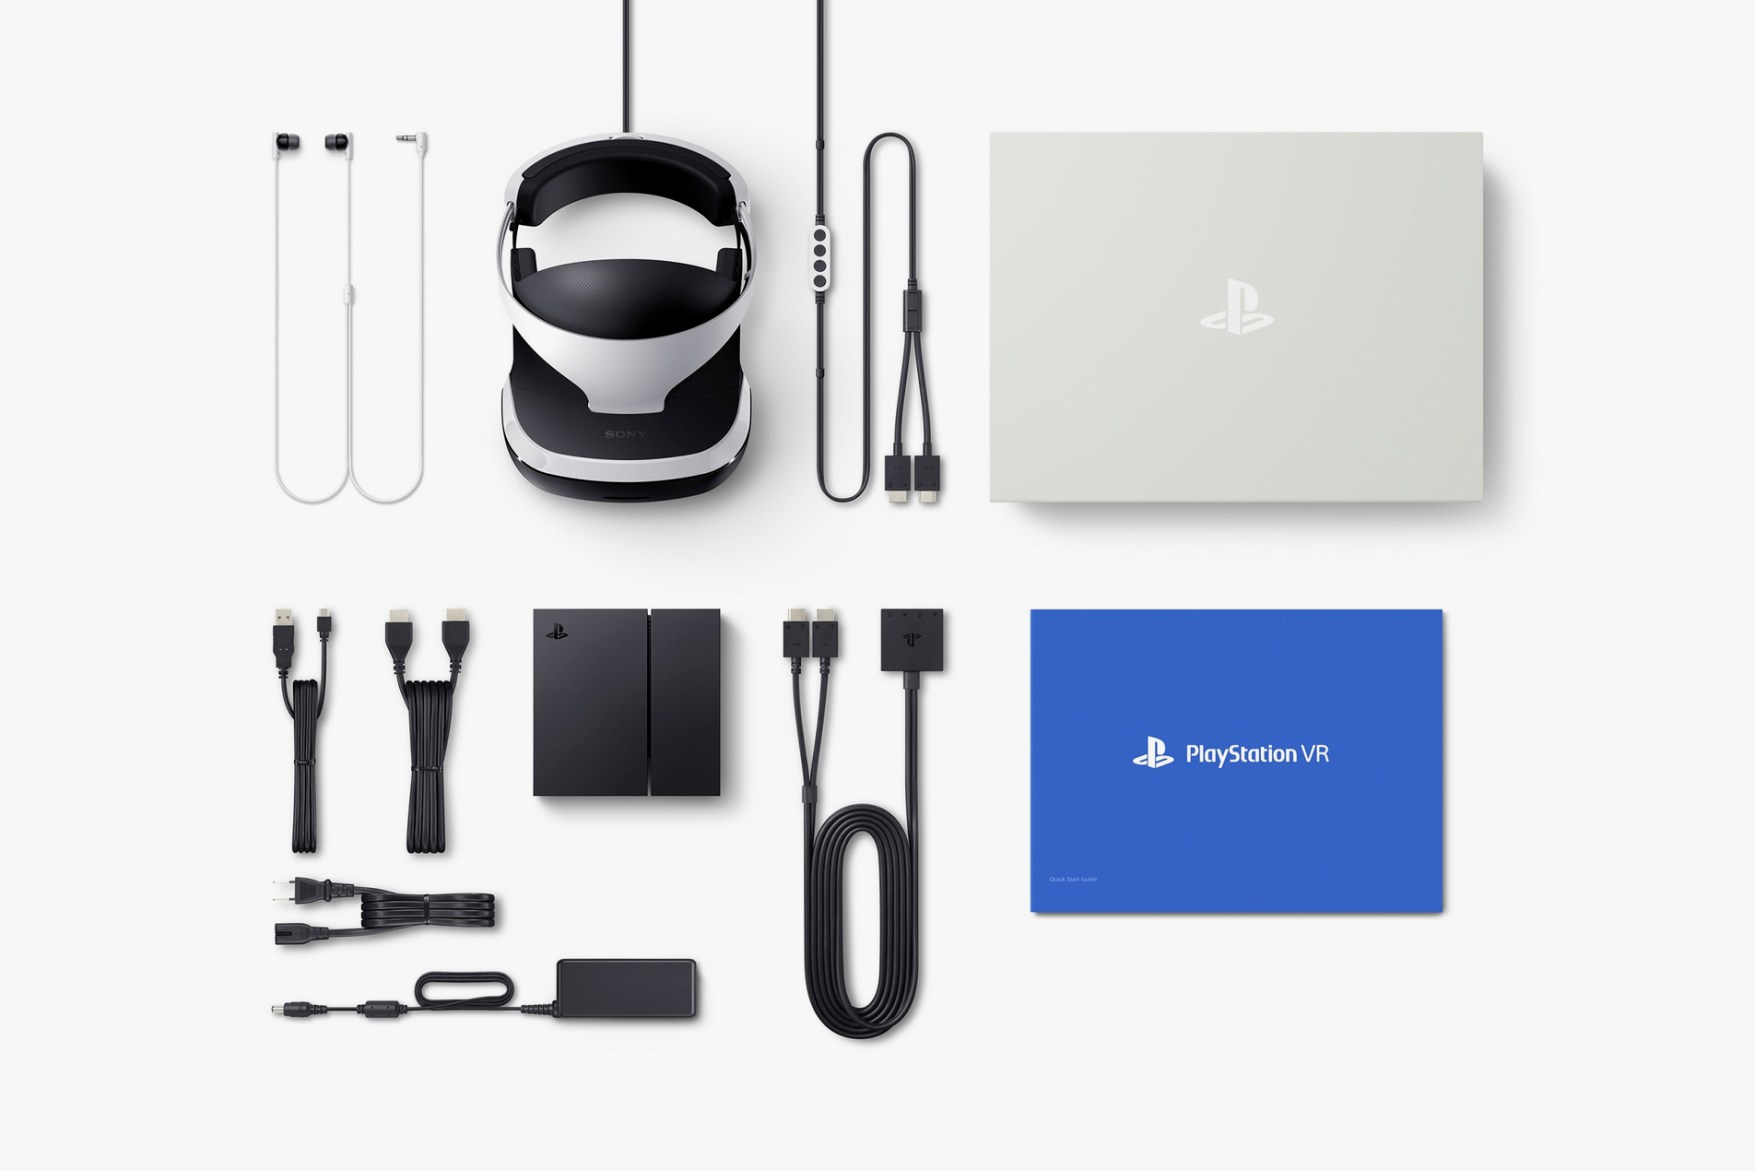 playstation-vr-is-coming-this-fall-for-399-2